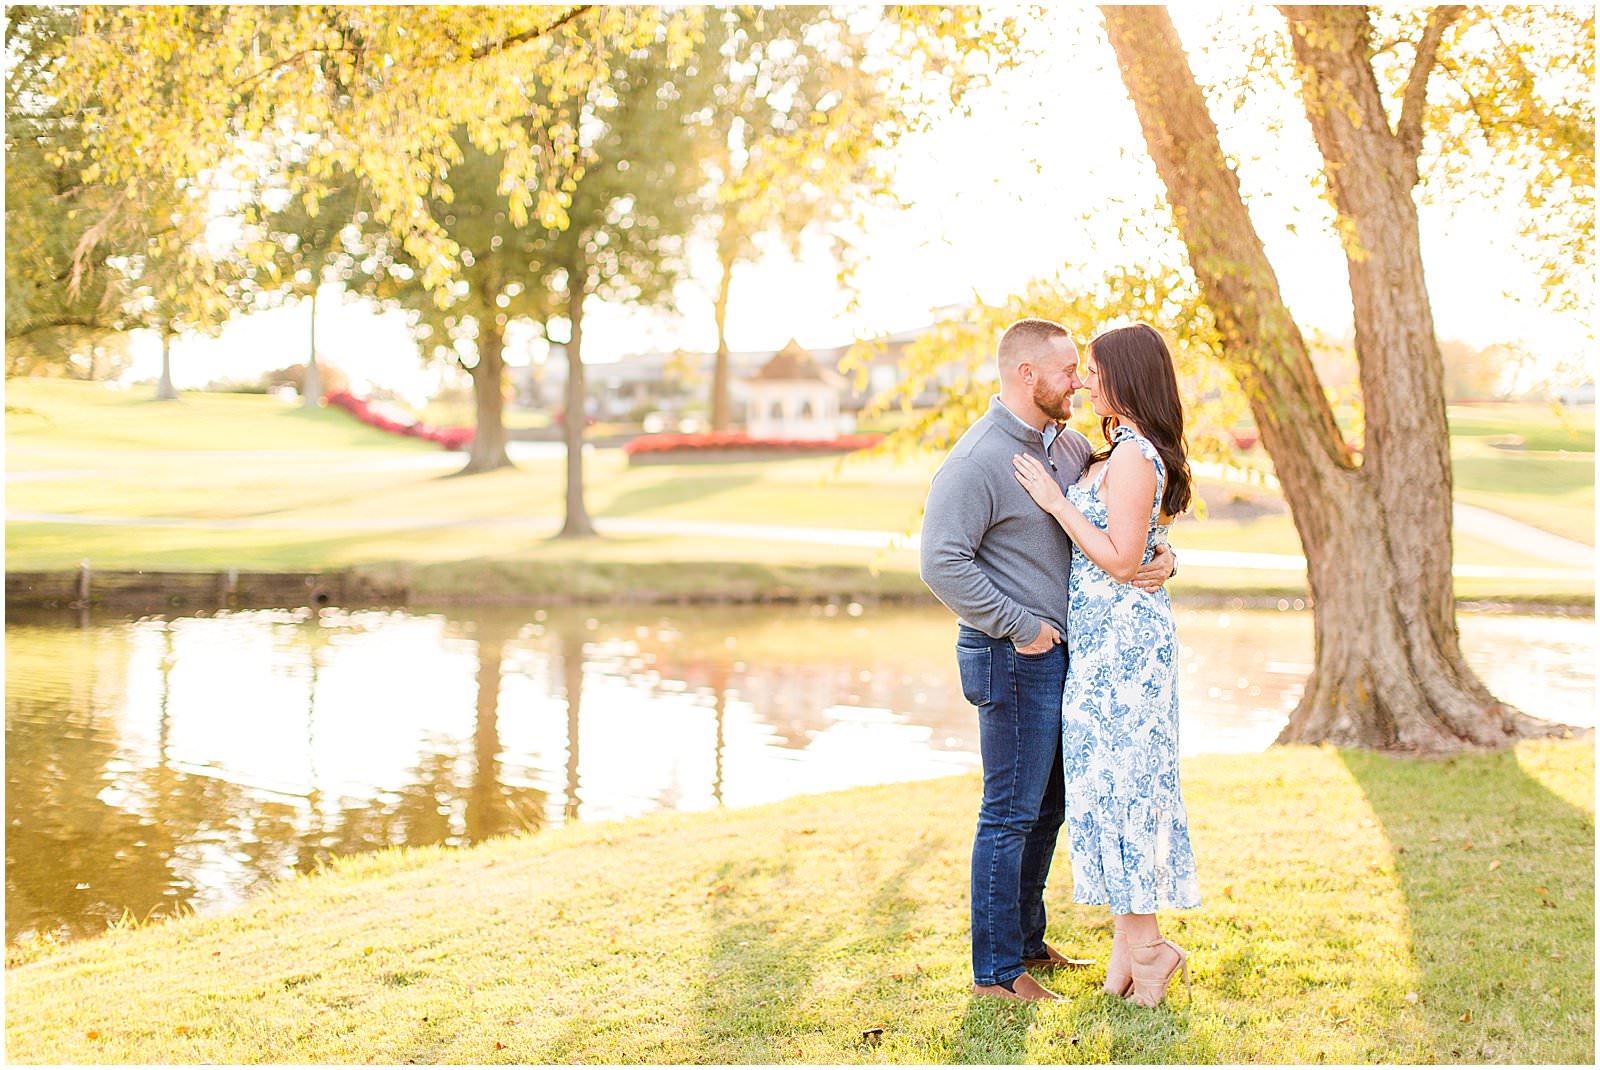 A Rolling Hills Country Club Engagement Session | Meagan and Kyle | Bret and Brandie Photography 0036.jpg